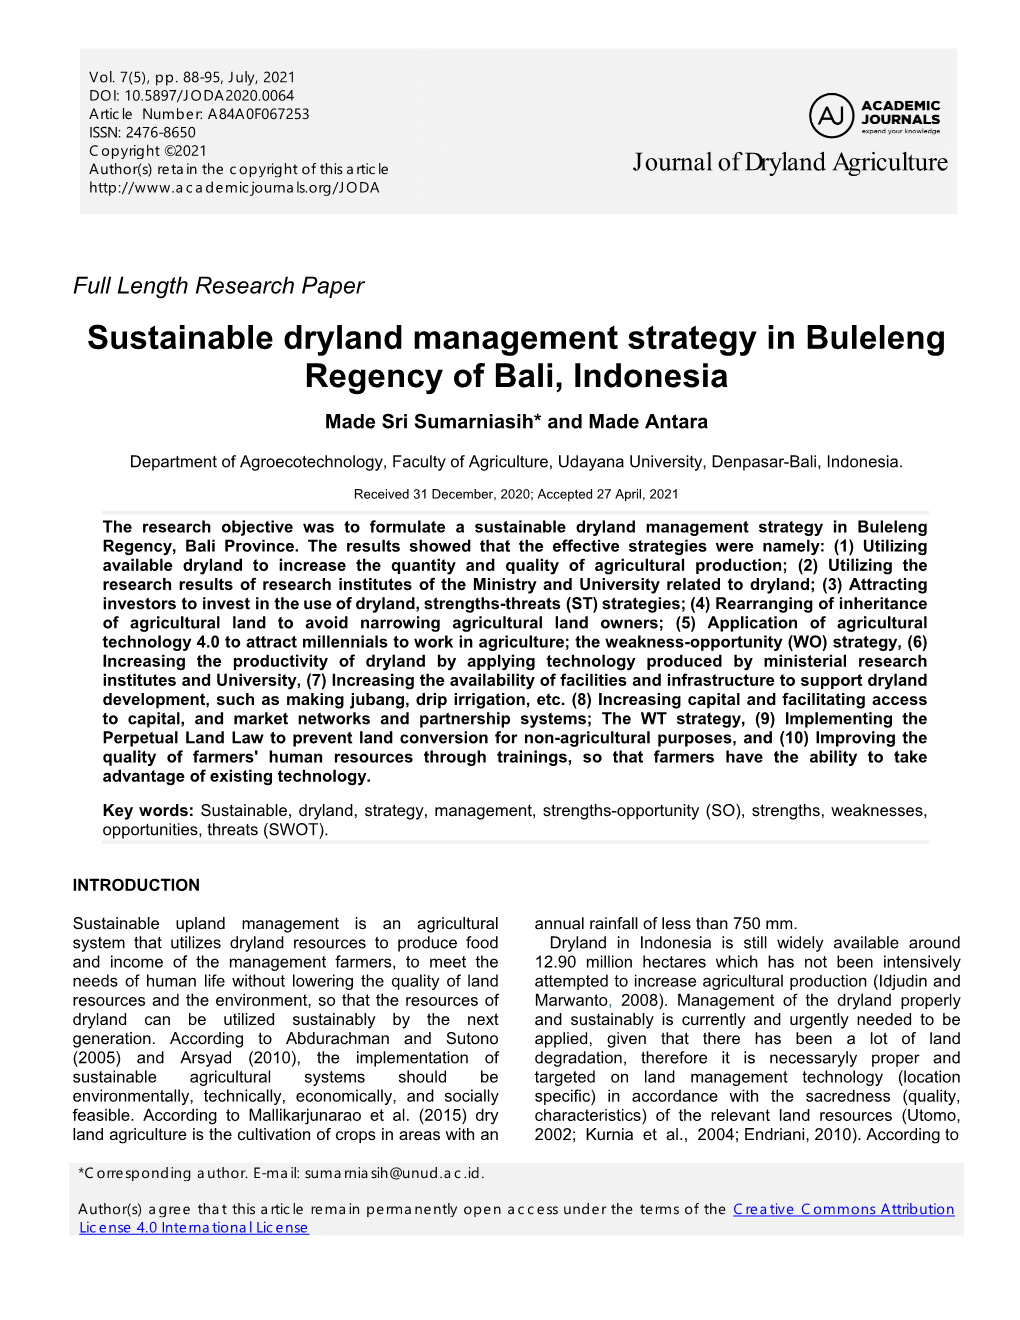 Sustainable Dryland Management Strategy in Buleleng Regency of Bali, Indonesia